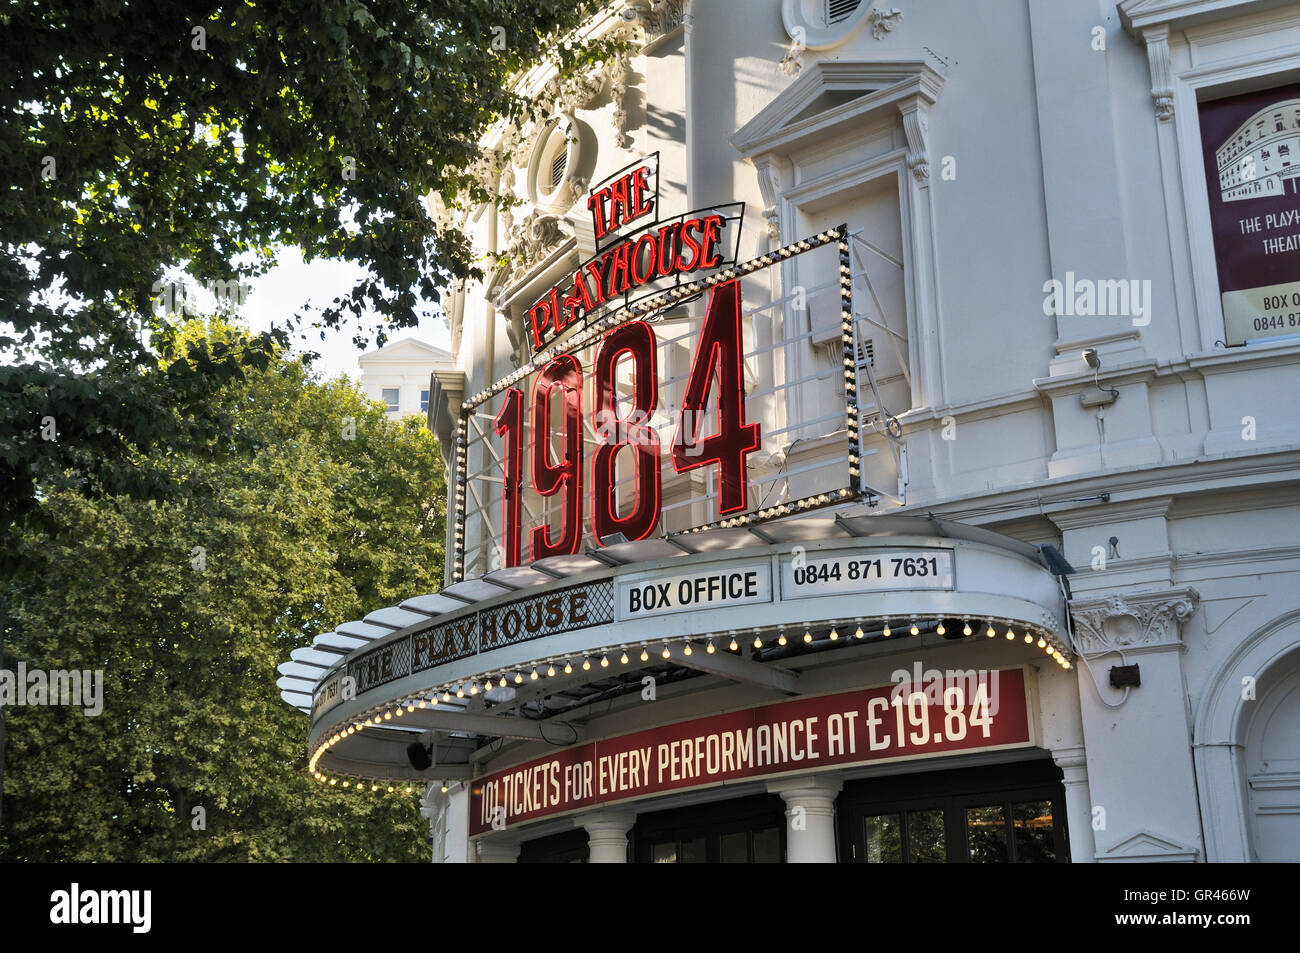 Acclaimed adaptation of George Orwell's famous novel 1984 showing at The Playhouse Theatre, London, England, UK Stock Photo